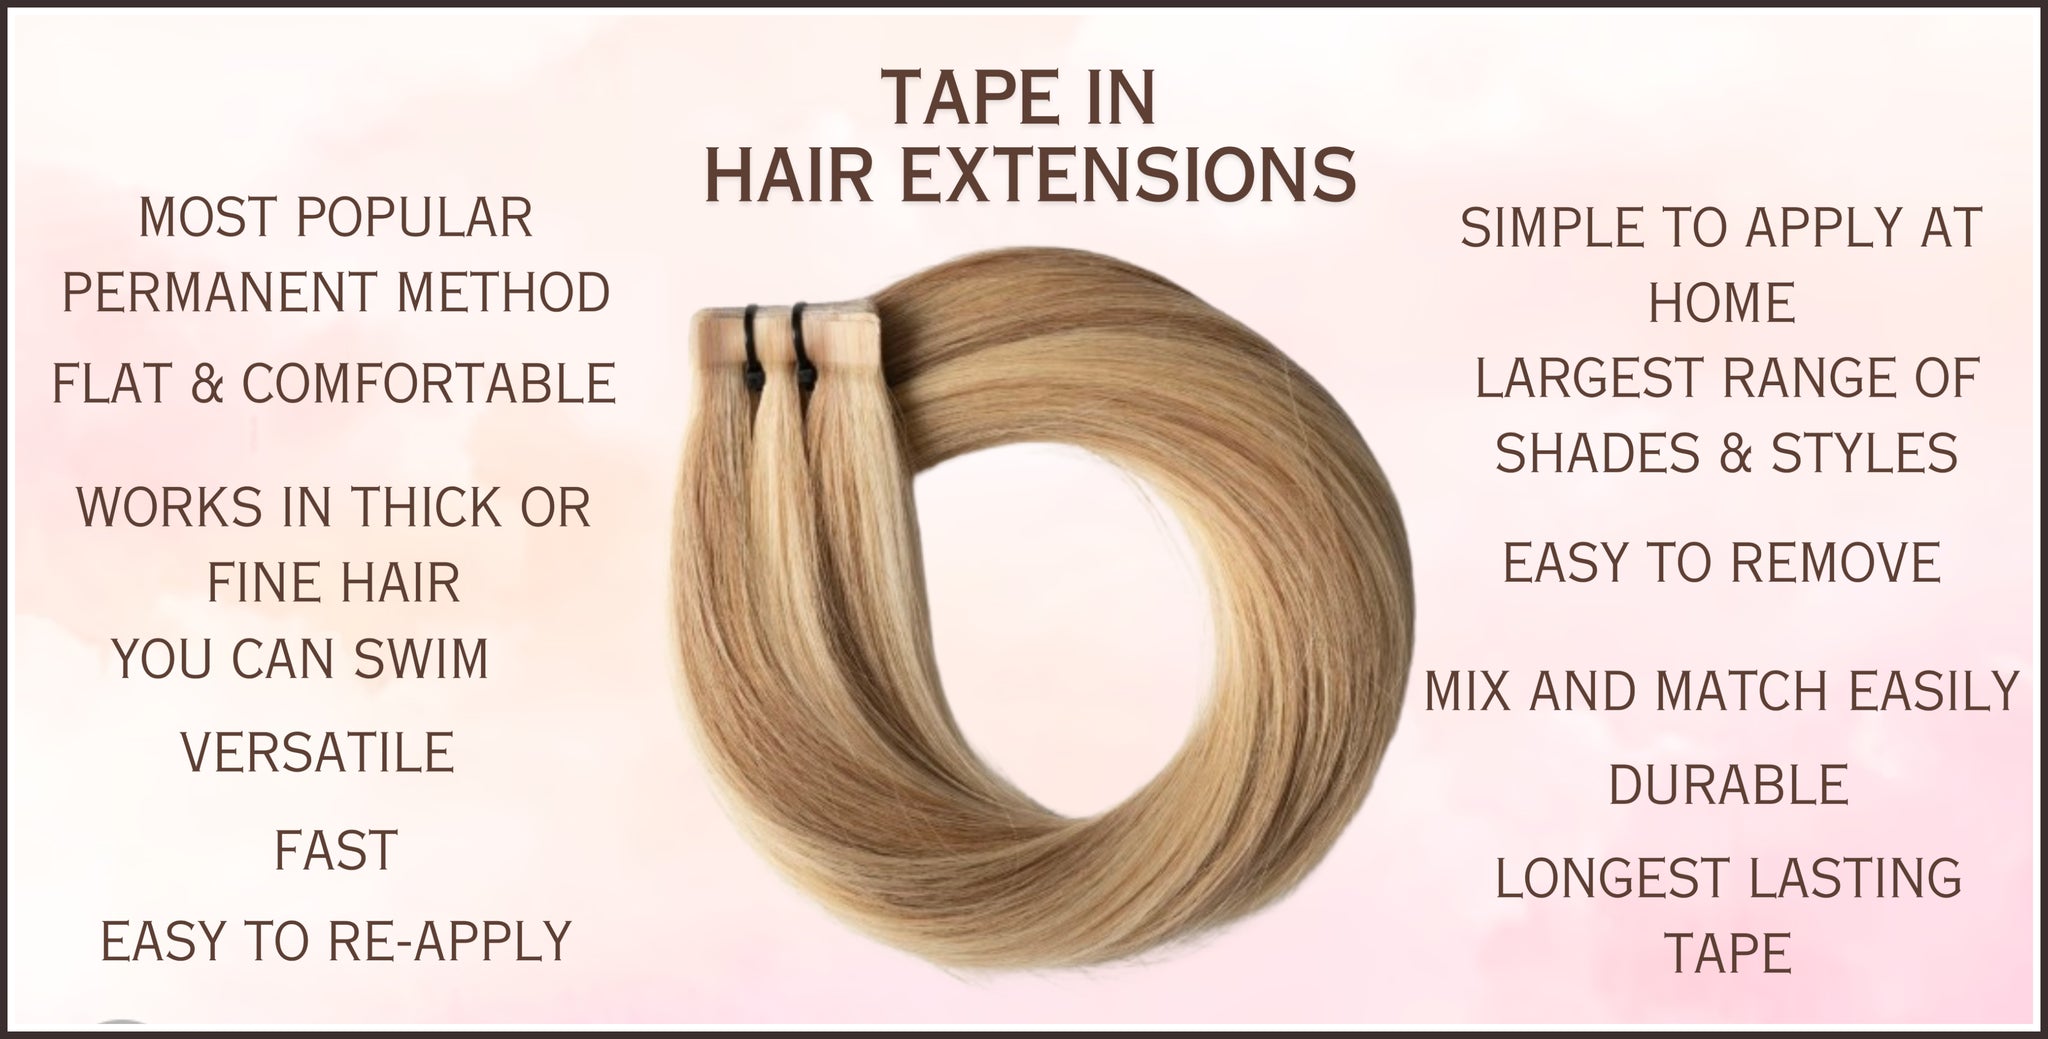 What are the benefits of micro-bead hair extensions